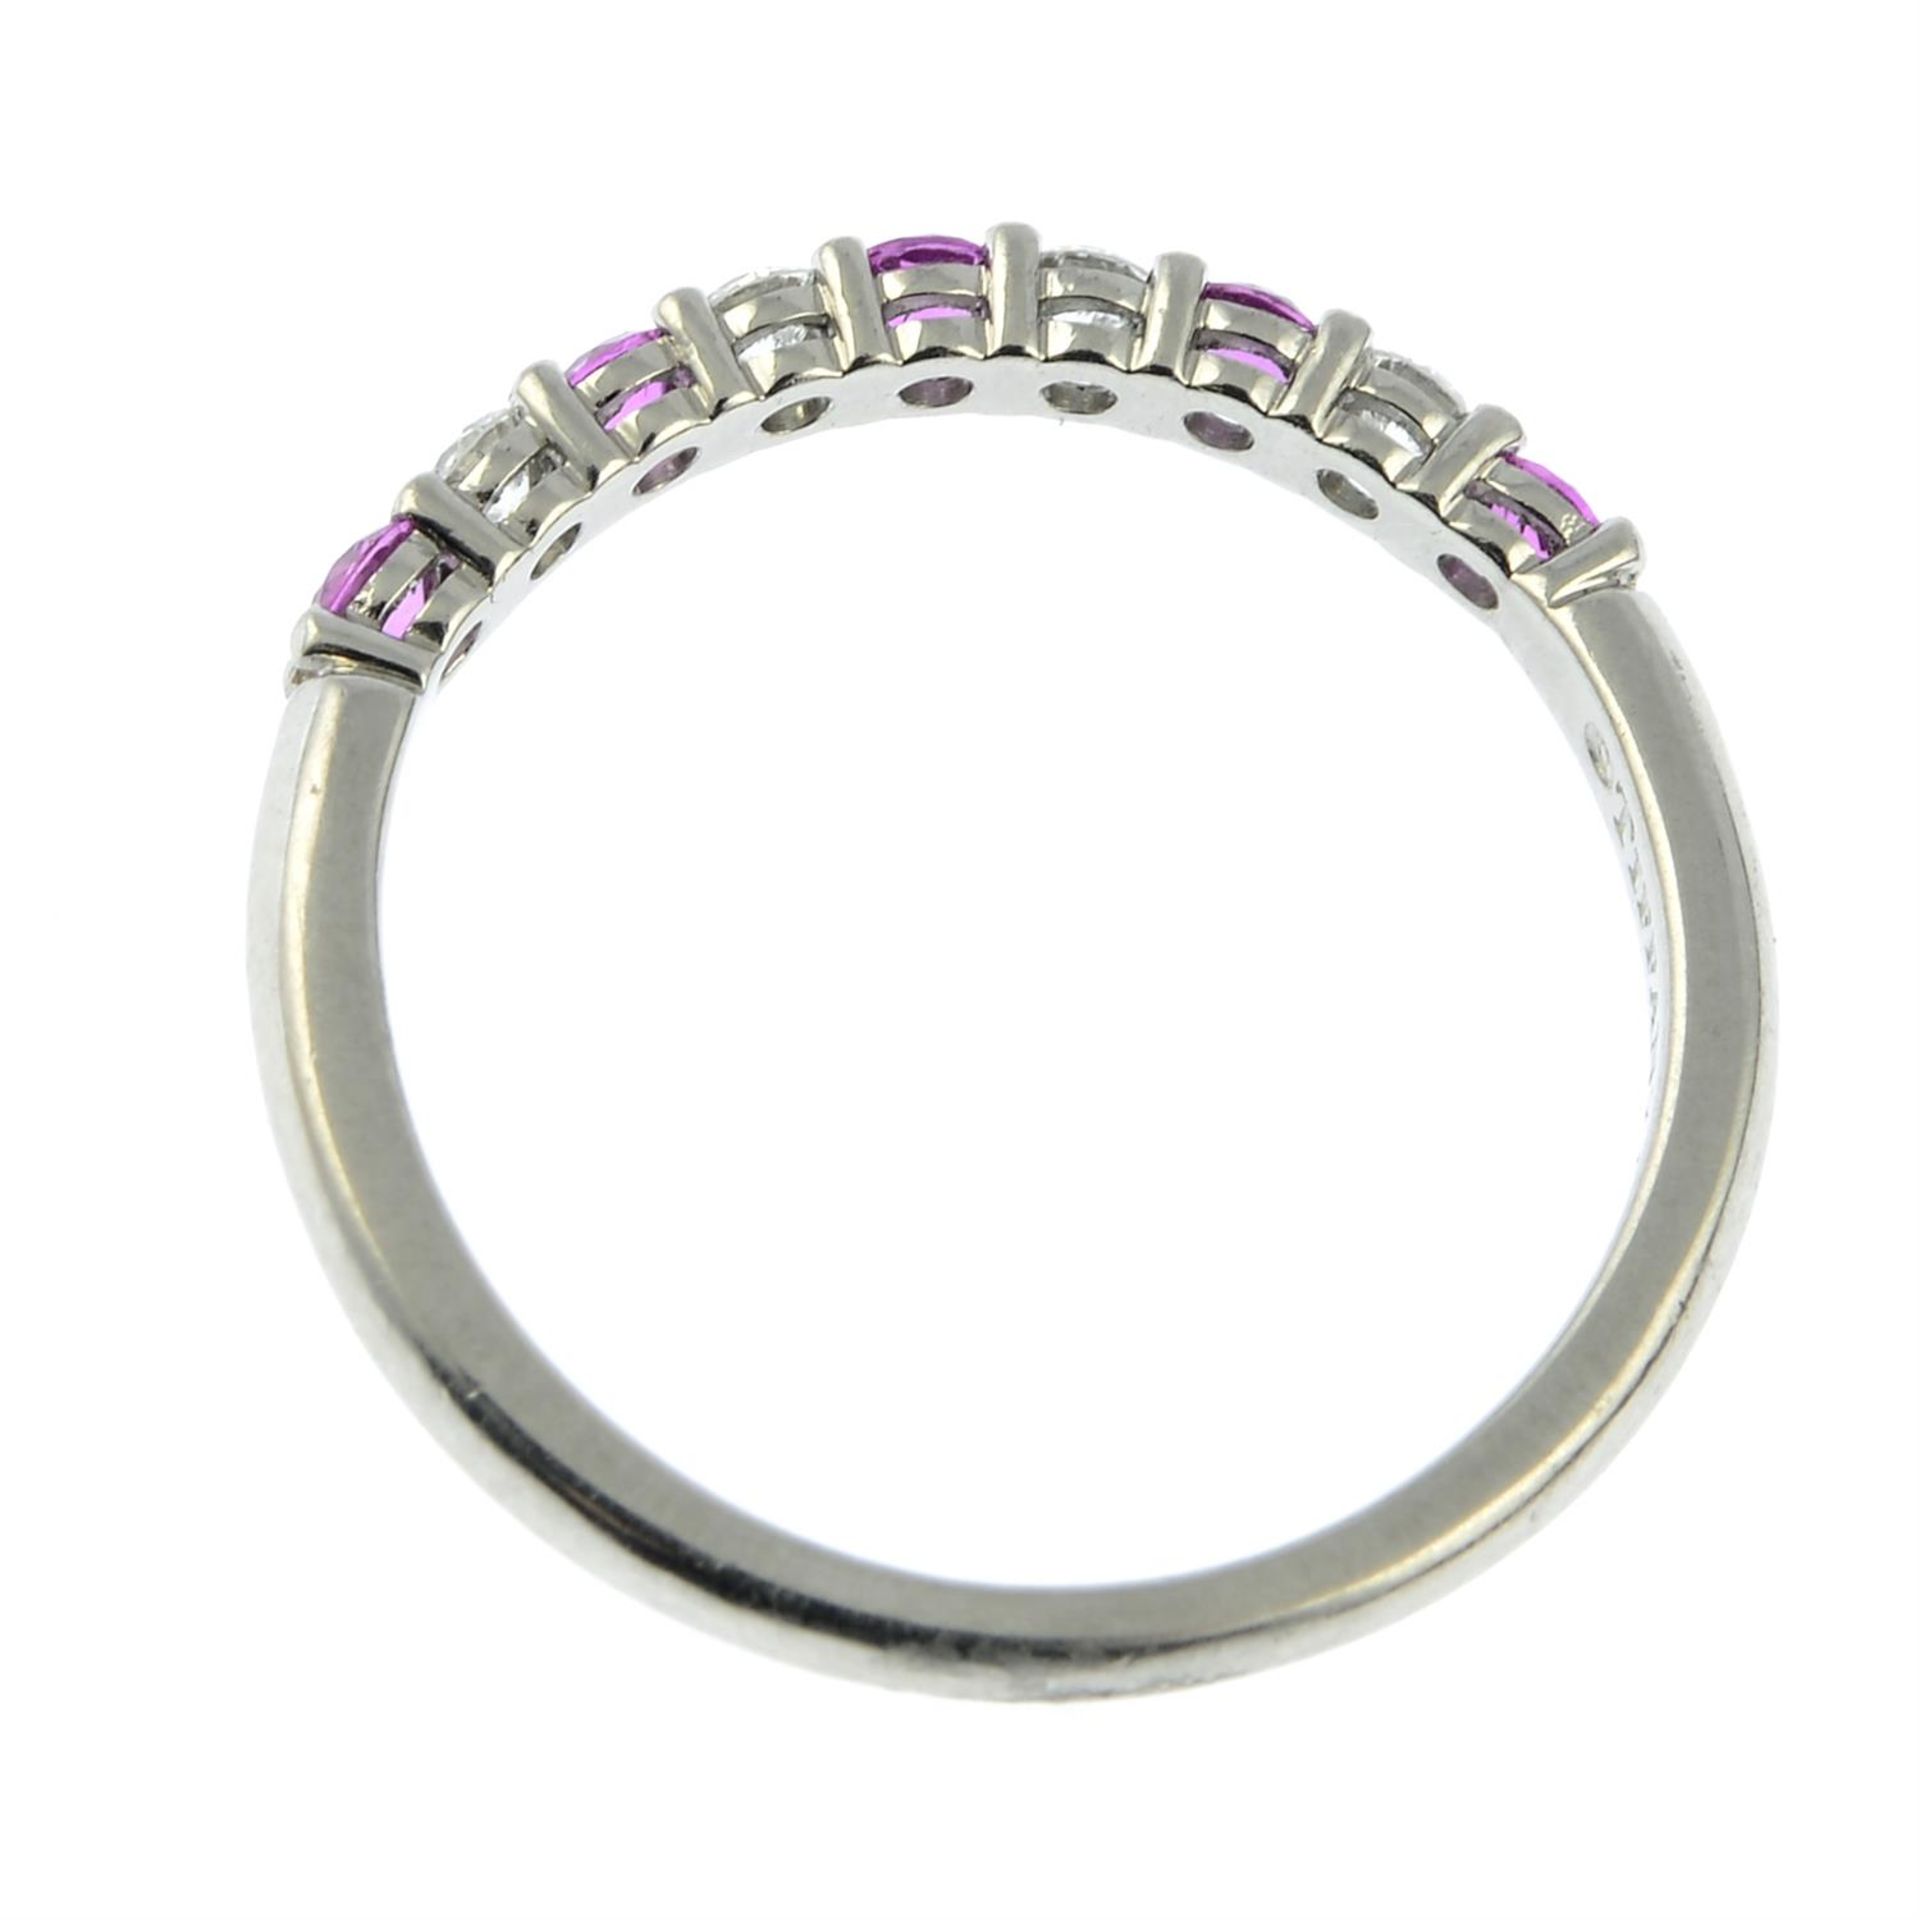 A platinum pink sapphire and brilliant-cut diamond band ring, by Tiffany & Co. - Image 5 of 6